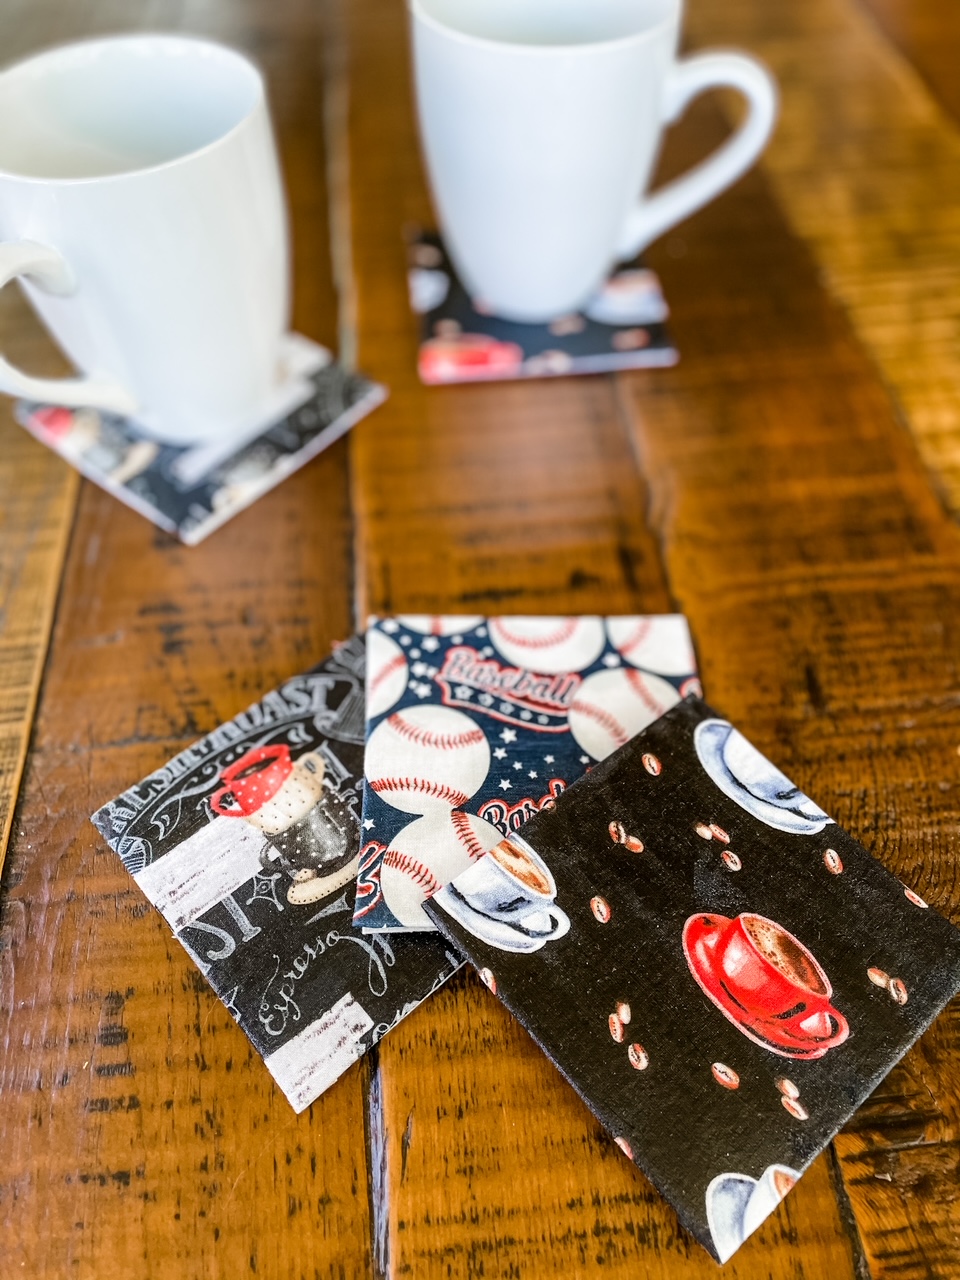 The easy no swe craft coasters - one with coffee, one with baseballs, and one with an abstract print